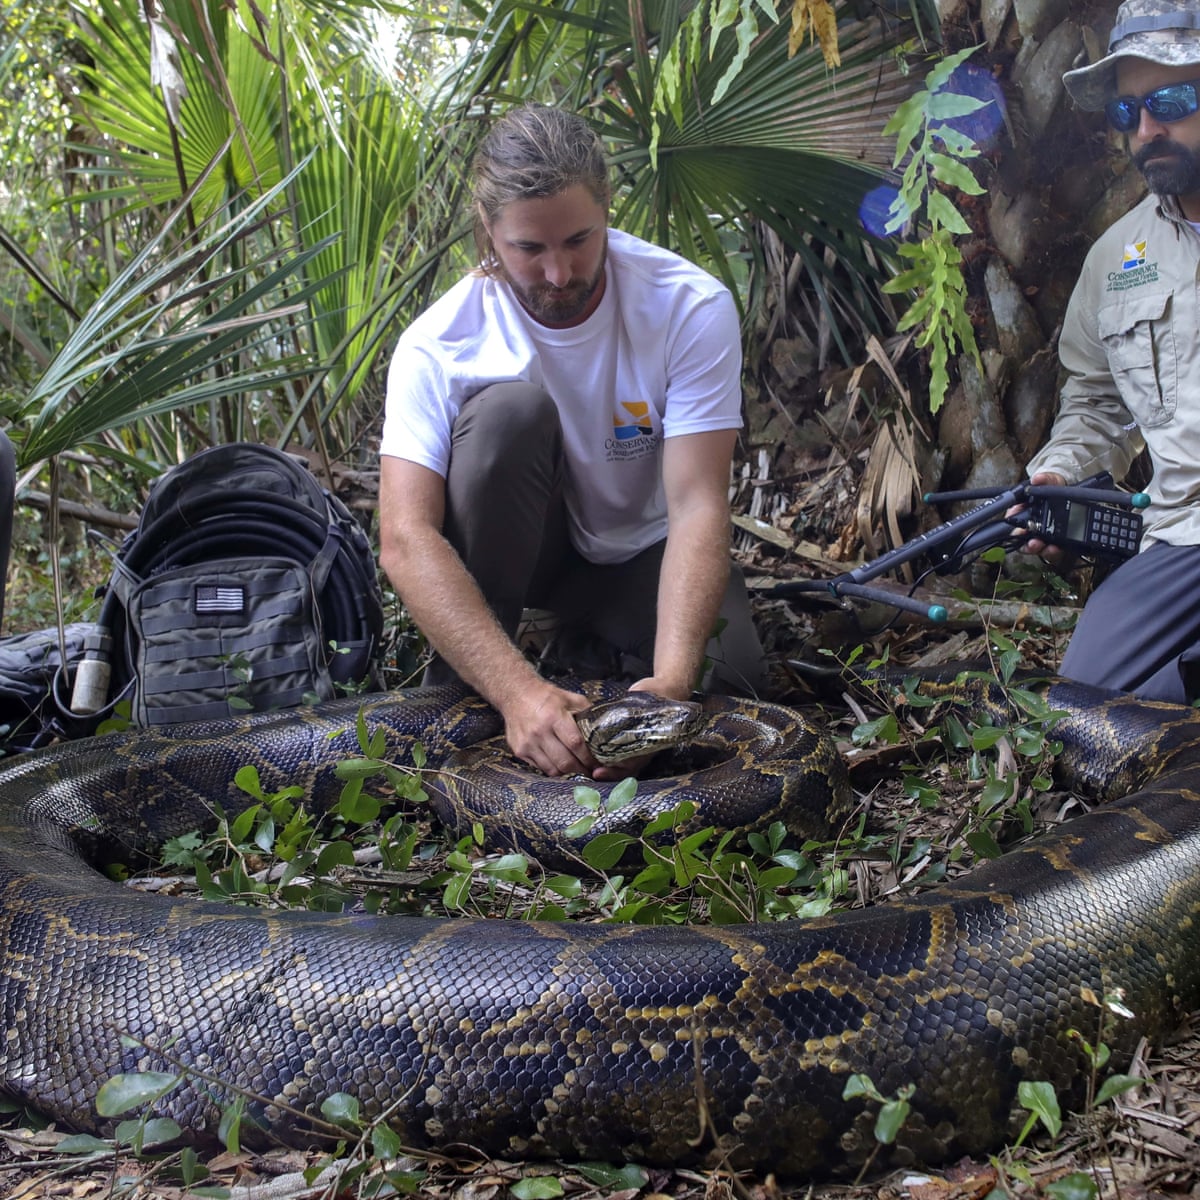 What Happens to Captured Florida Pythons?